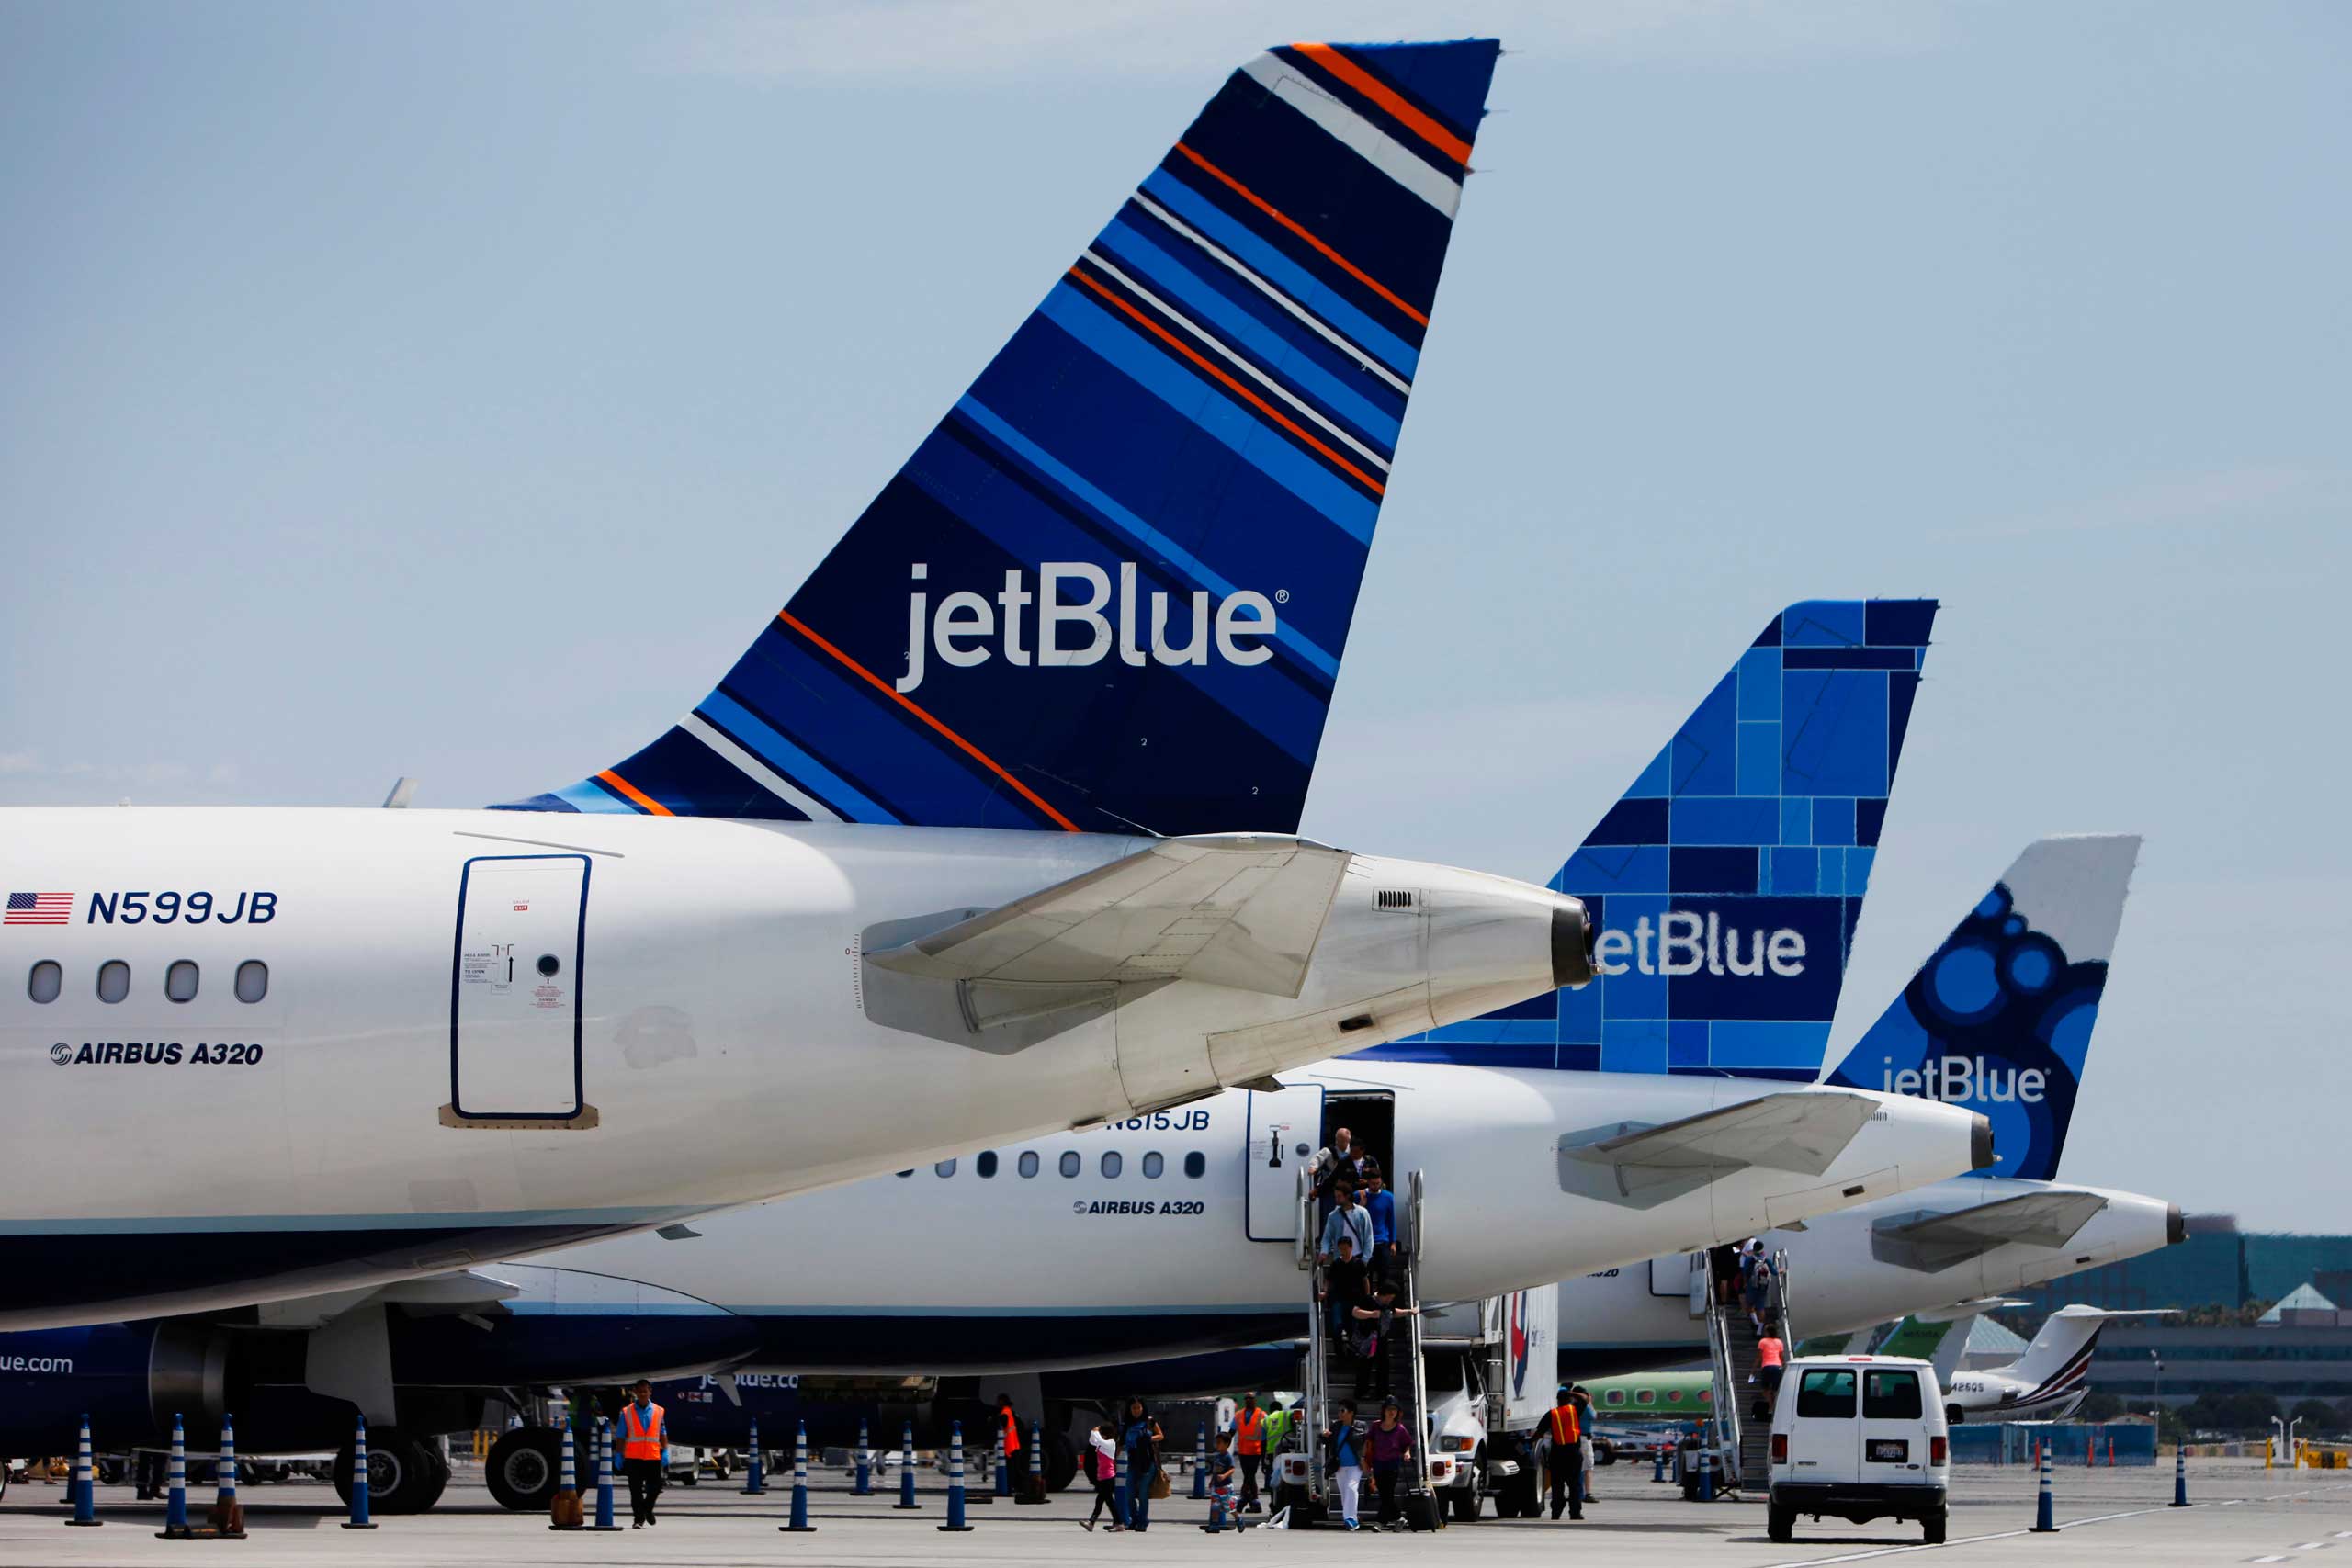 Passengers exit a JetBlue Airways Corp. plane at Long Beach Airport (LGB) in Long Beach, California, U.S., on Monday, July 22, 2013. (Bloomberg&amp;Bloomberg — Getty Images)